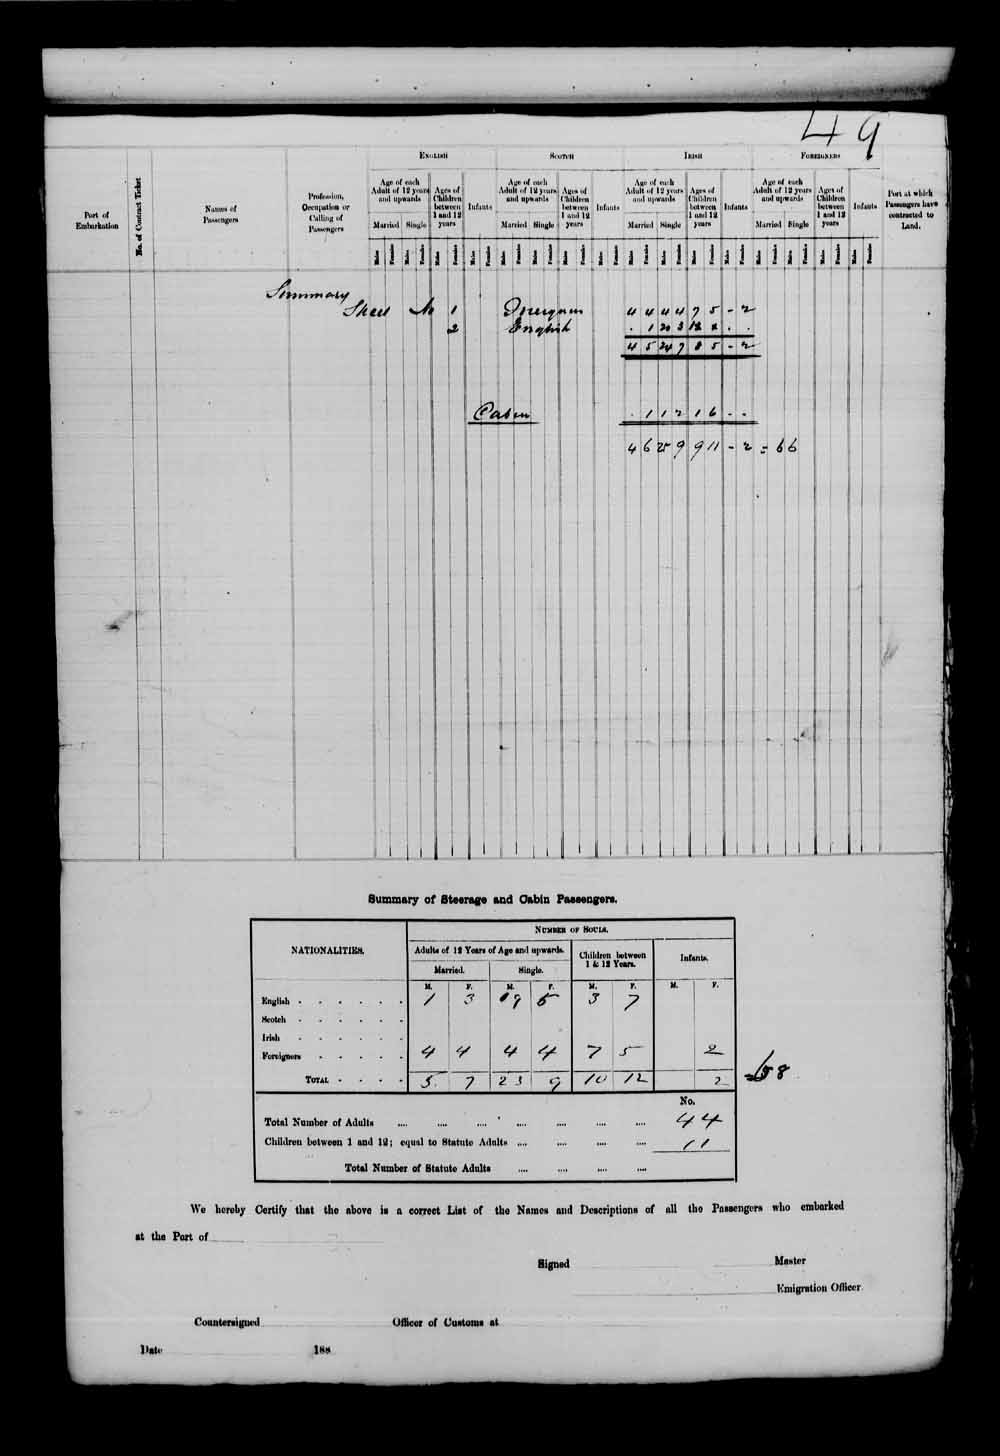 Digitized page of Passenger Lists for Image No.: e003543403